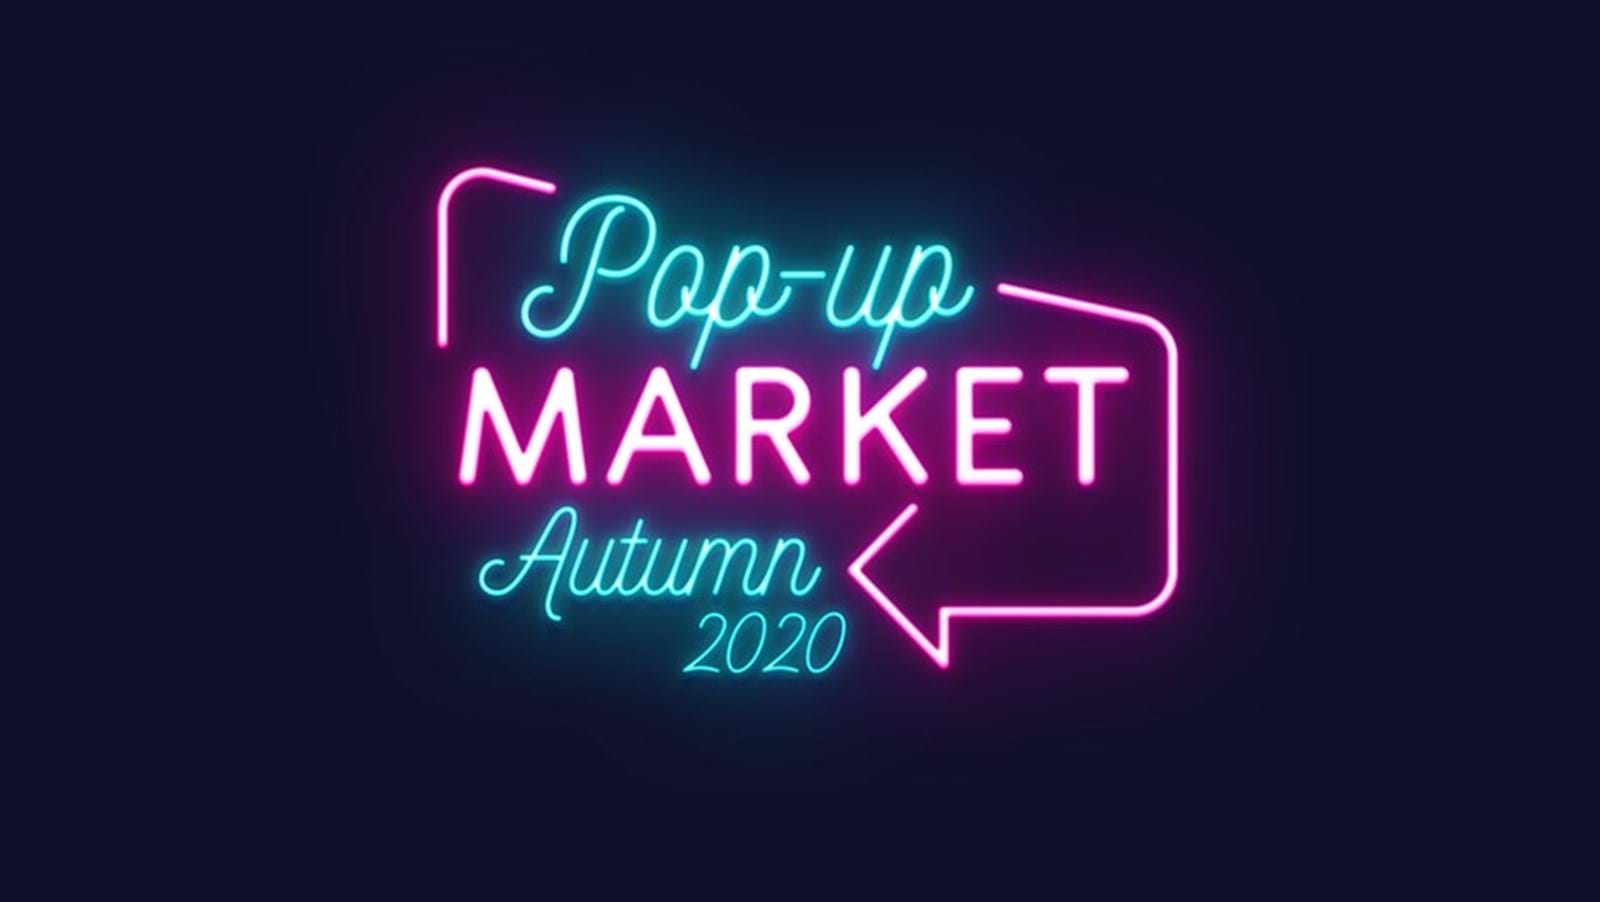 Passion Distribution Announces Autumn Slate Of Programming And Launch Of Pop-Up Market